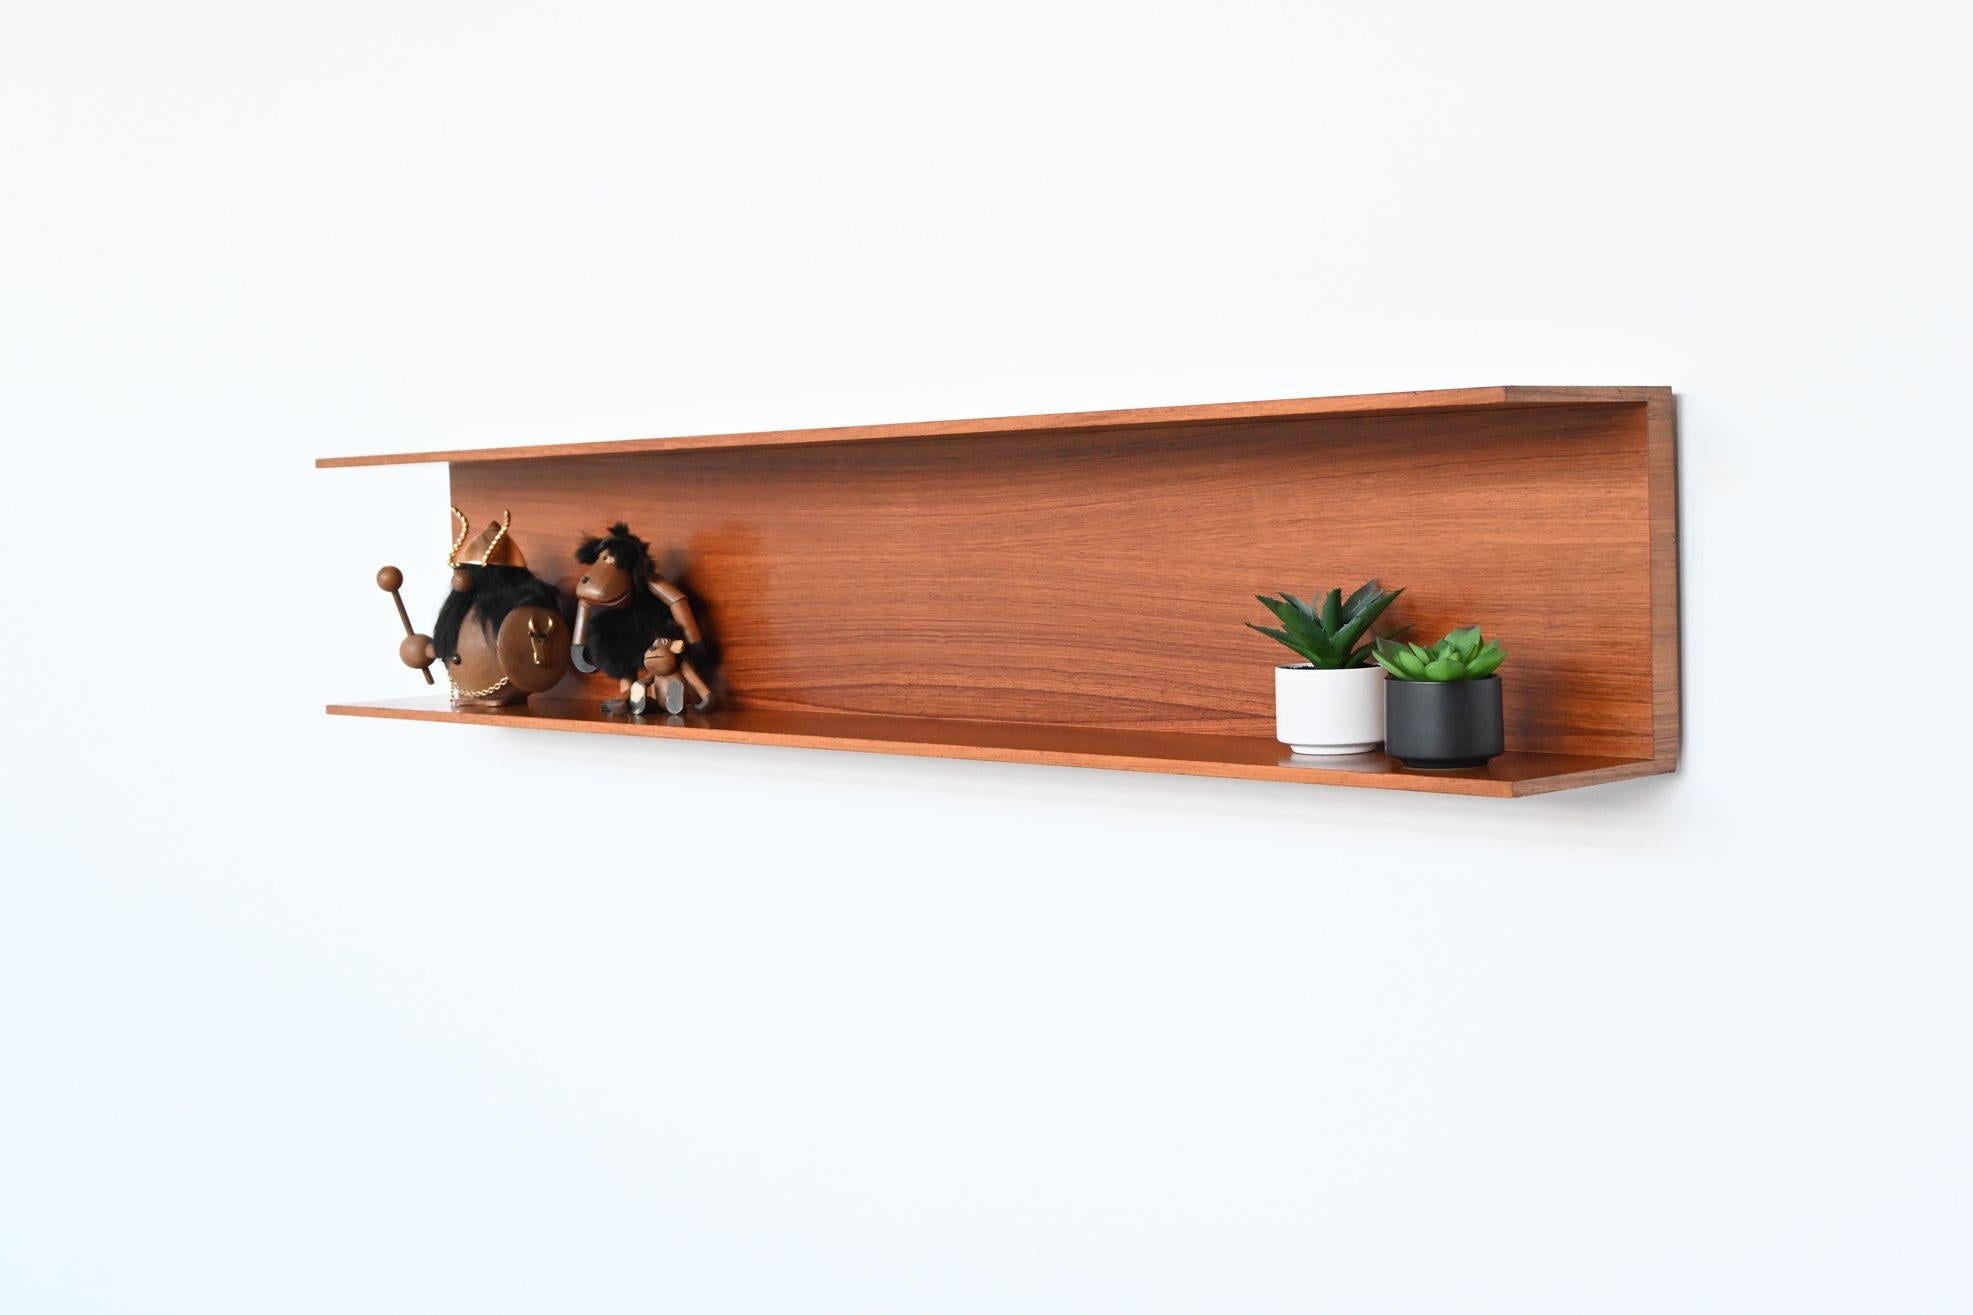 Beautiful minimalistic large wall shelf designed by Walter Wirz for Wilhelm Renz, Germany 1960. This U-shaped shelf is made of high-quality very nicely grained teak wood and can be mounted freely floating on the wall. Due to its simple design, it